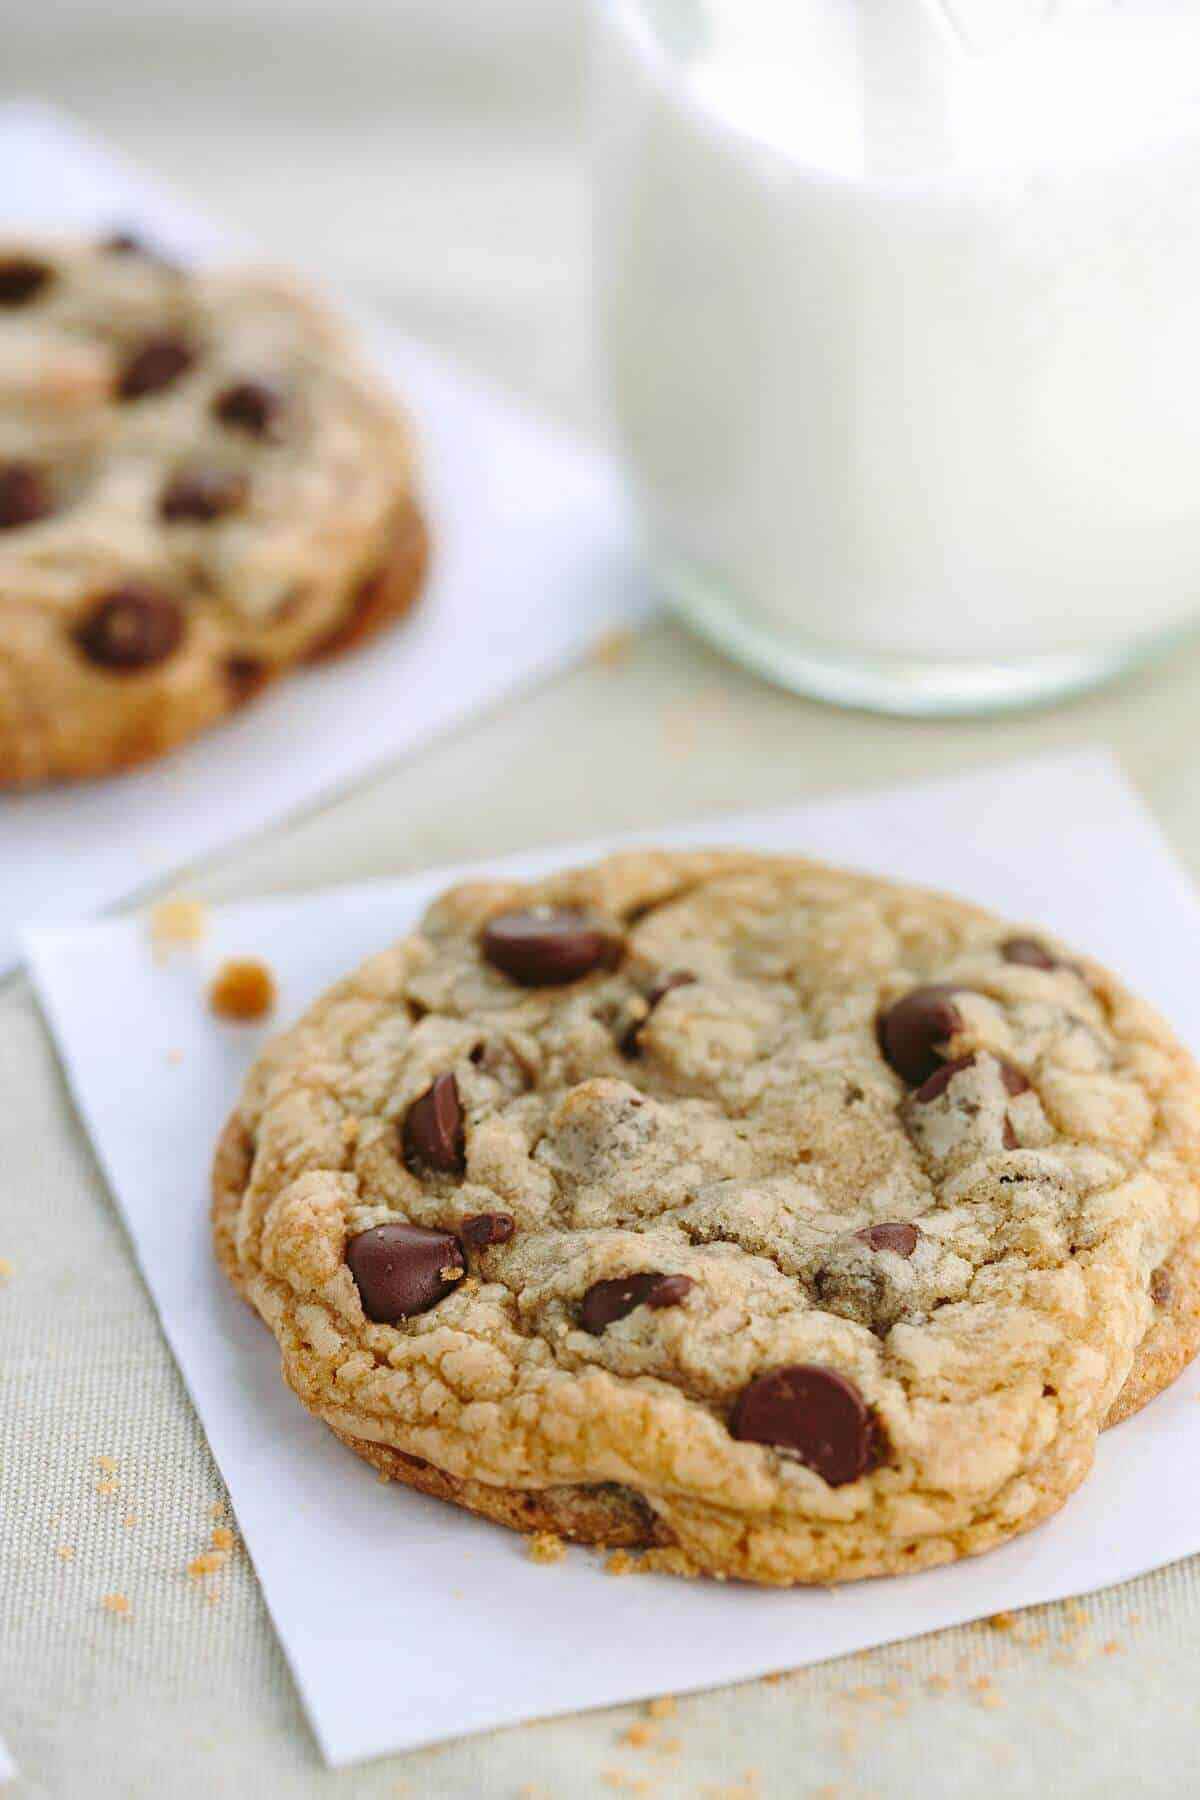 Soft Chewy Choc Chip Cookies Recipe
 The Best Chewy Chocolate Chip Cookies Recipe